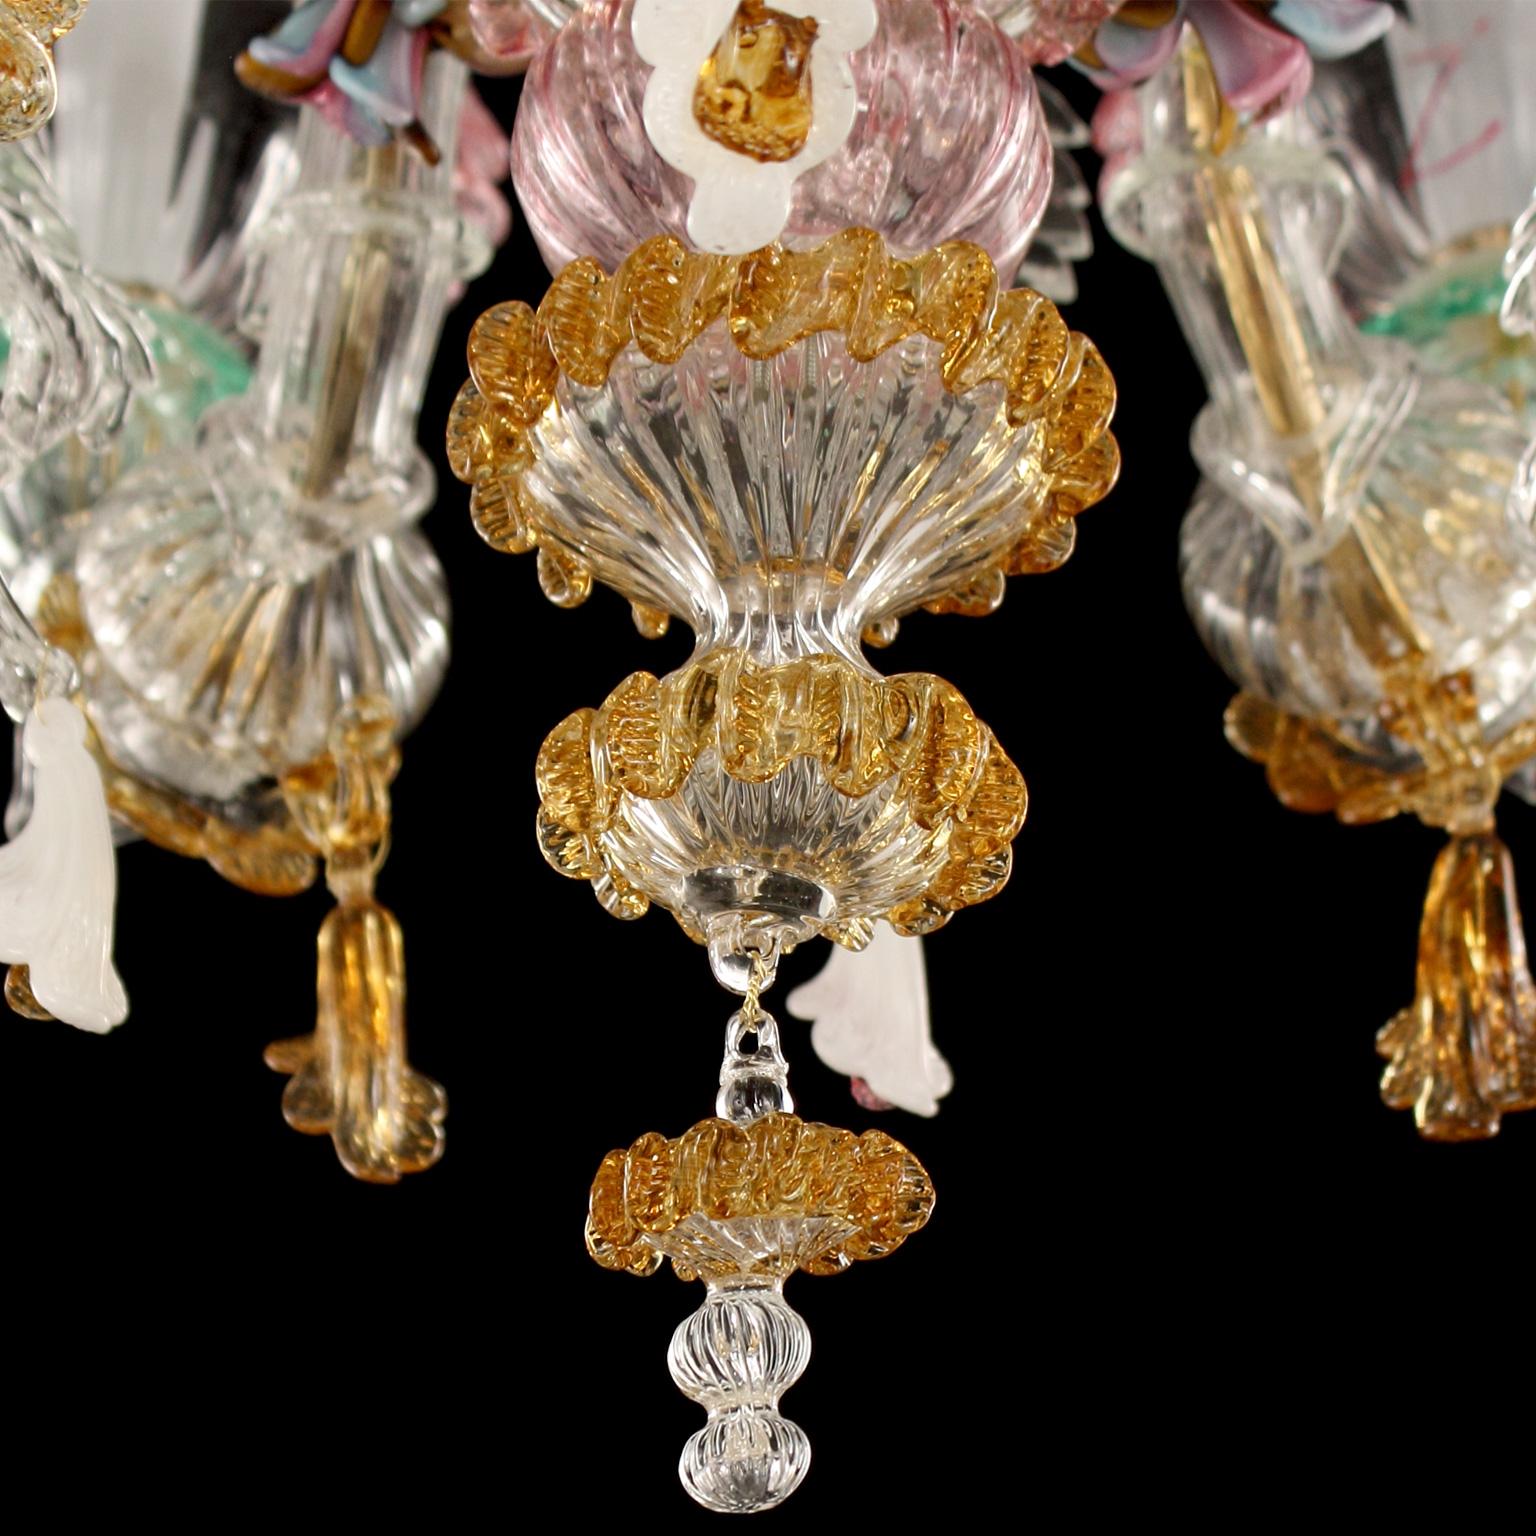 Rezzonico Murano Chandelier 6 Arms Artistic Multi-Color Glass Flowers Multiforme In New Condition For Sale In Trebaseleghe, IT